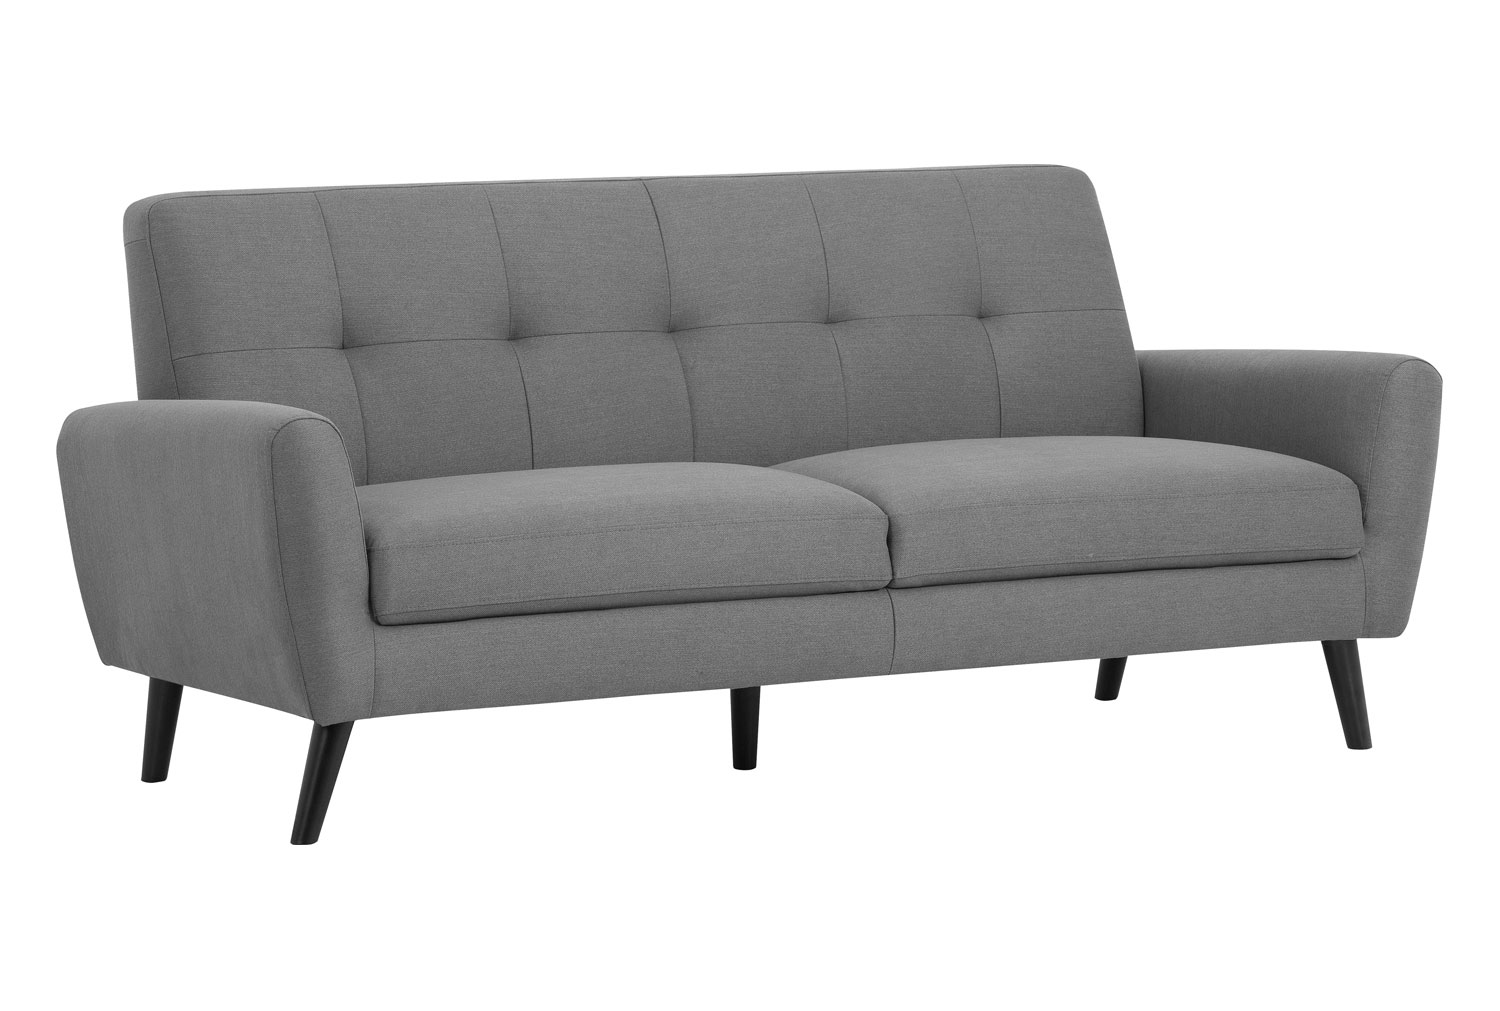 Connelly 3 Seater Sofa (Grey Linen)